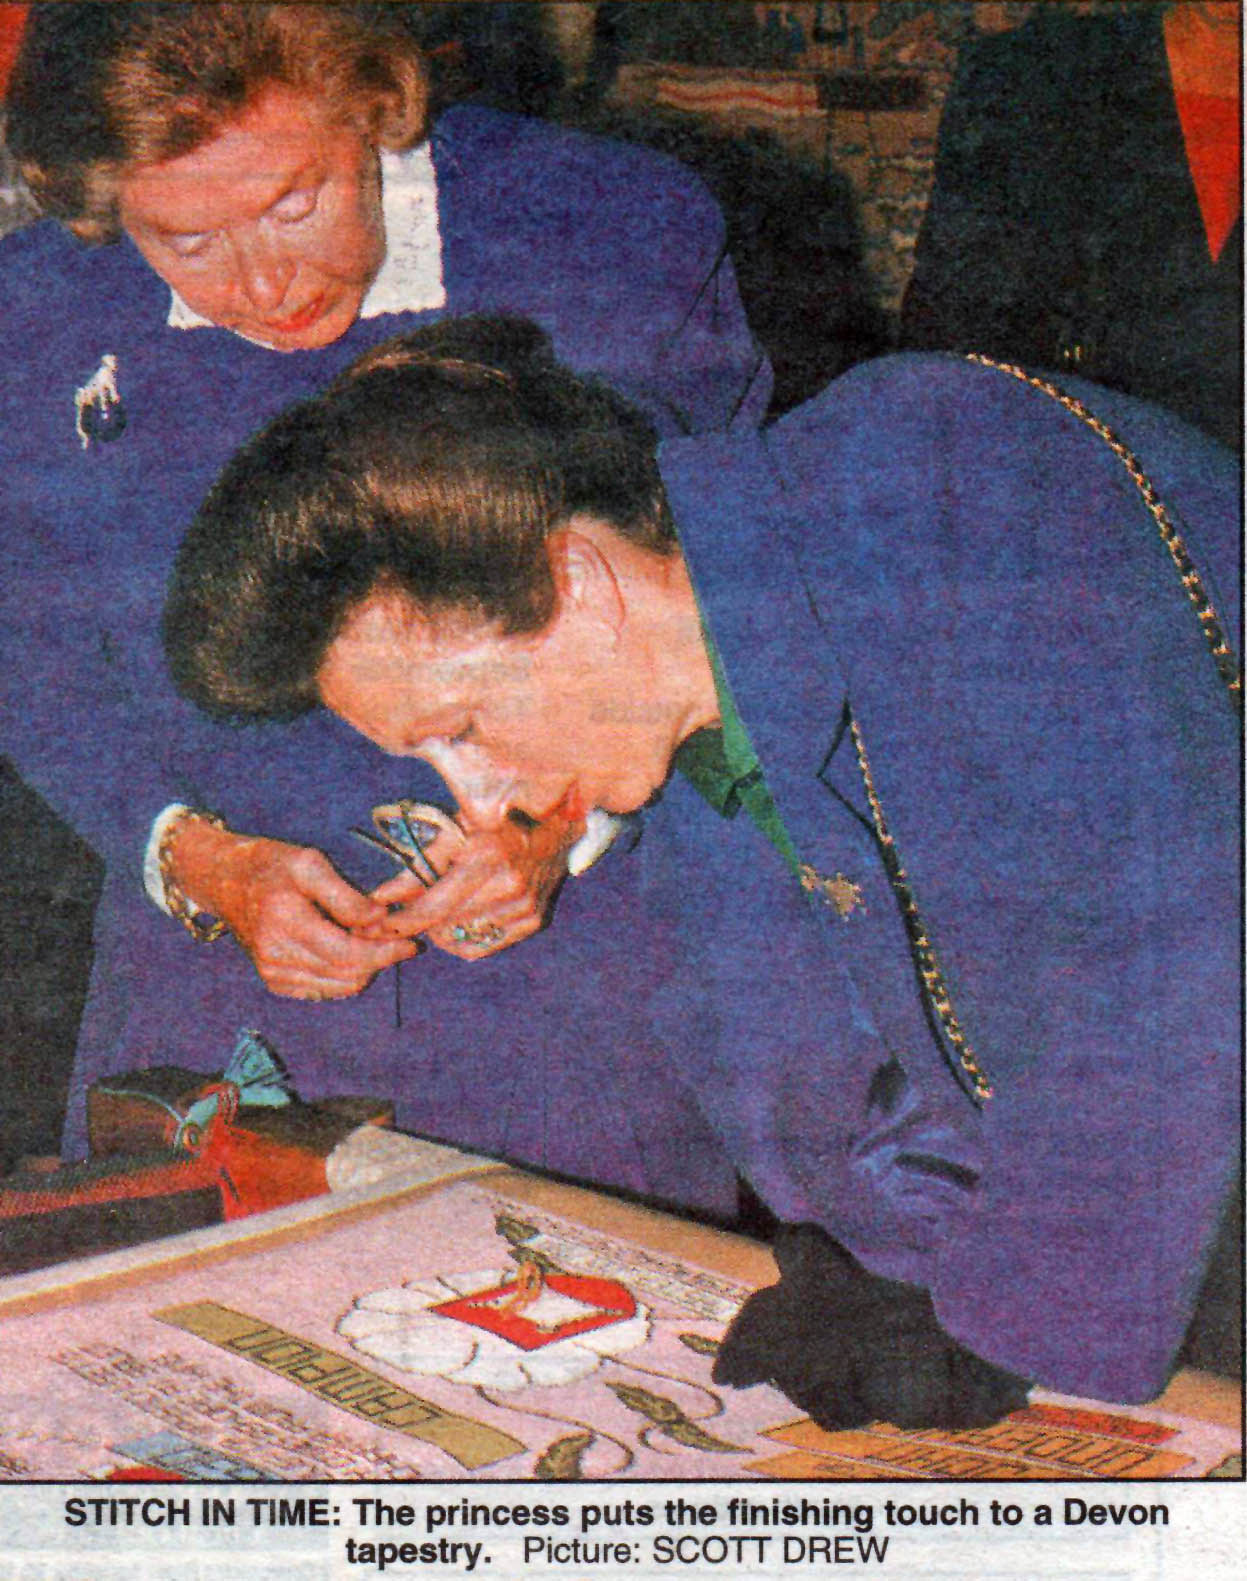 Sept 1994 - Princess Royal's Stitch in the 1630 Panel